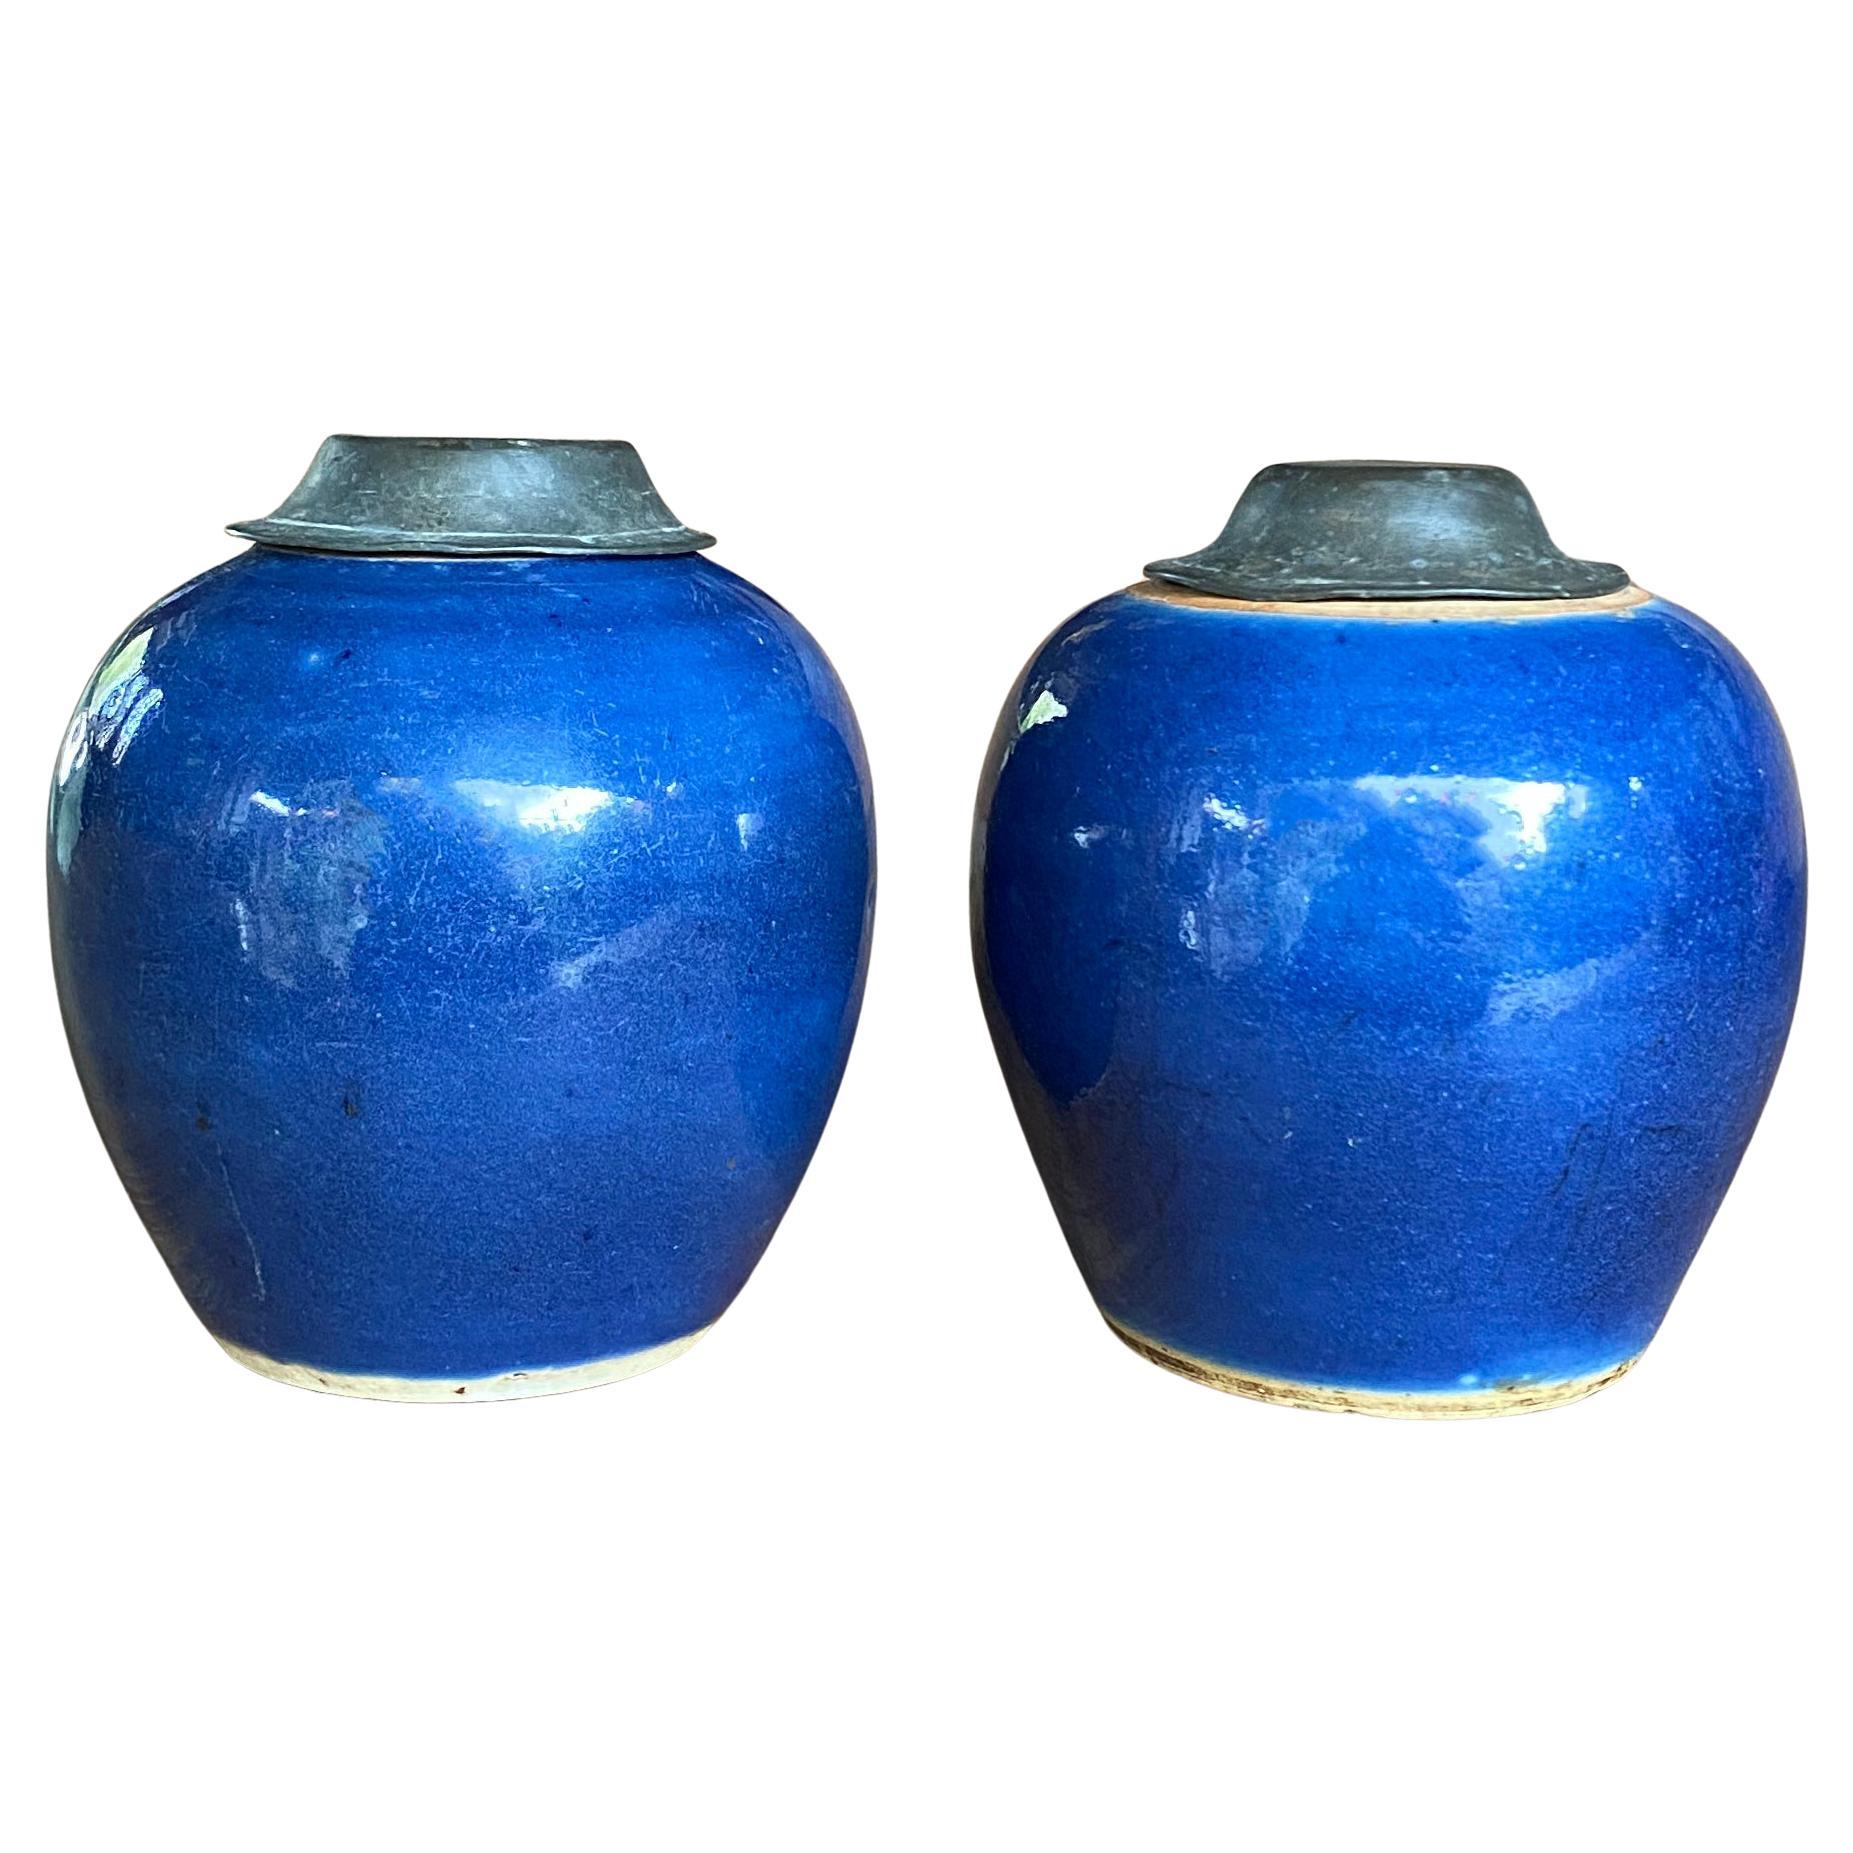 Pair of Small Blue Chinese Ceramic Ginger Jars, Early 20th Century